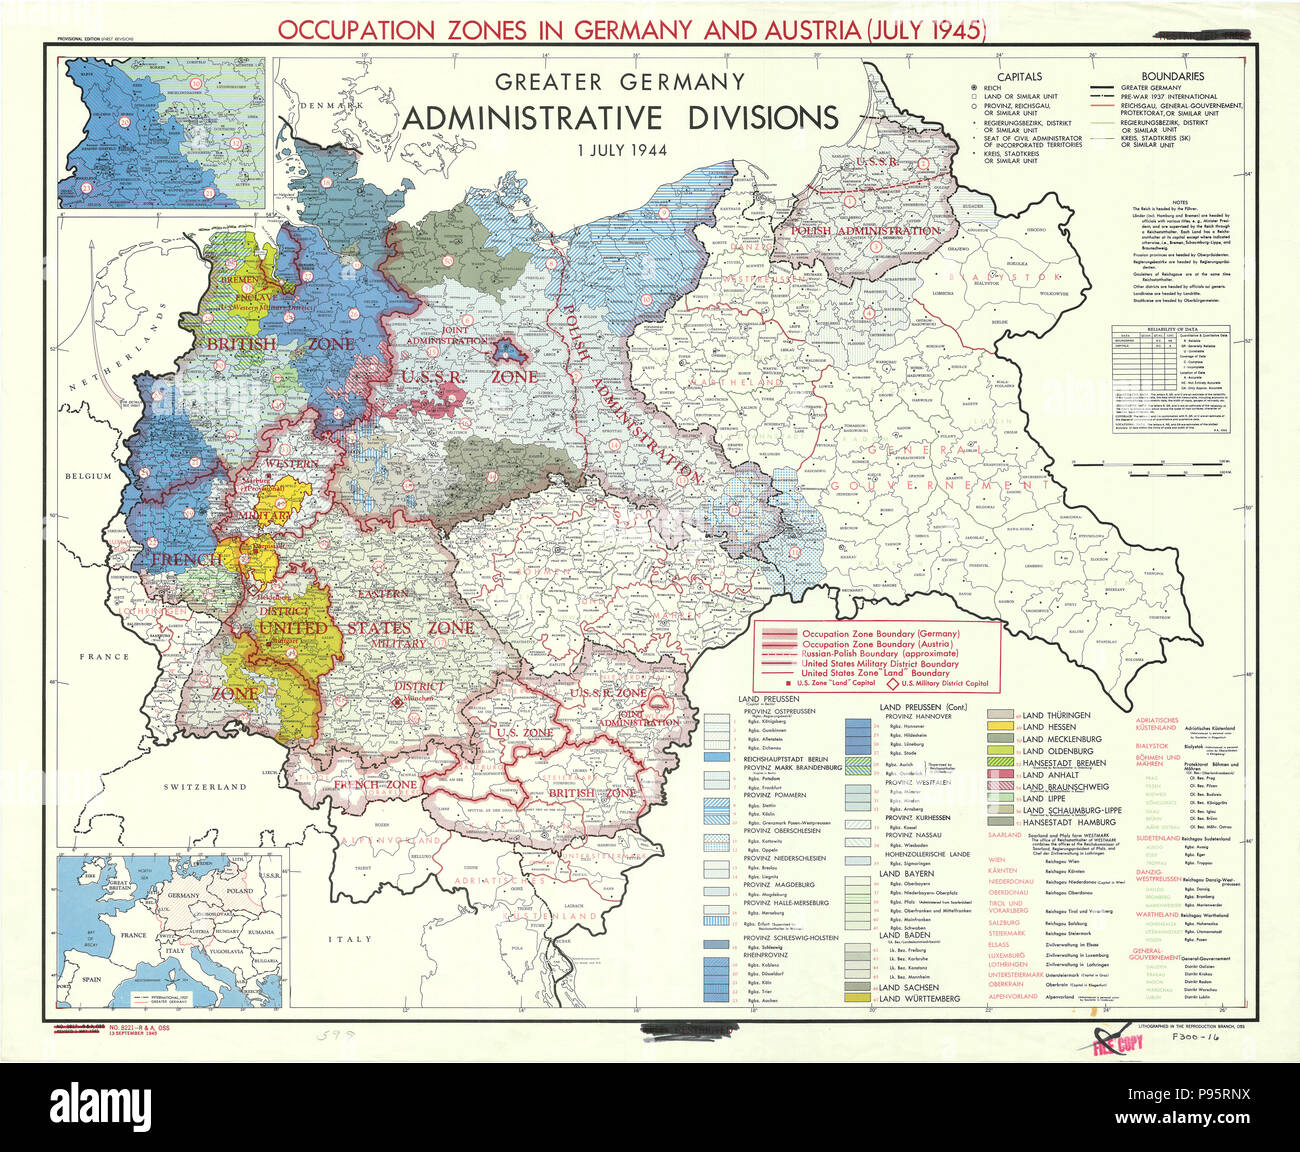 Map Showing Occupation Zones in Germany and Austria - July 1945 Stock Photo